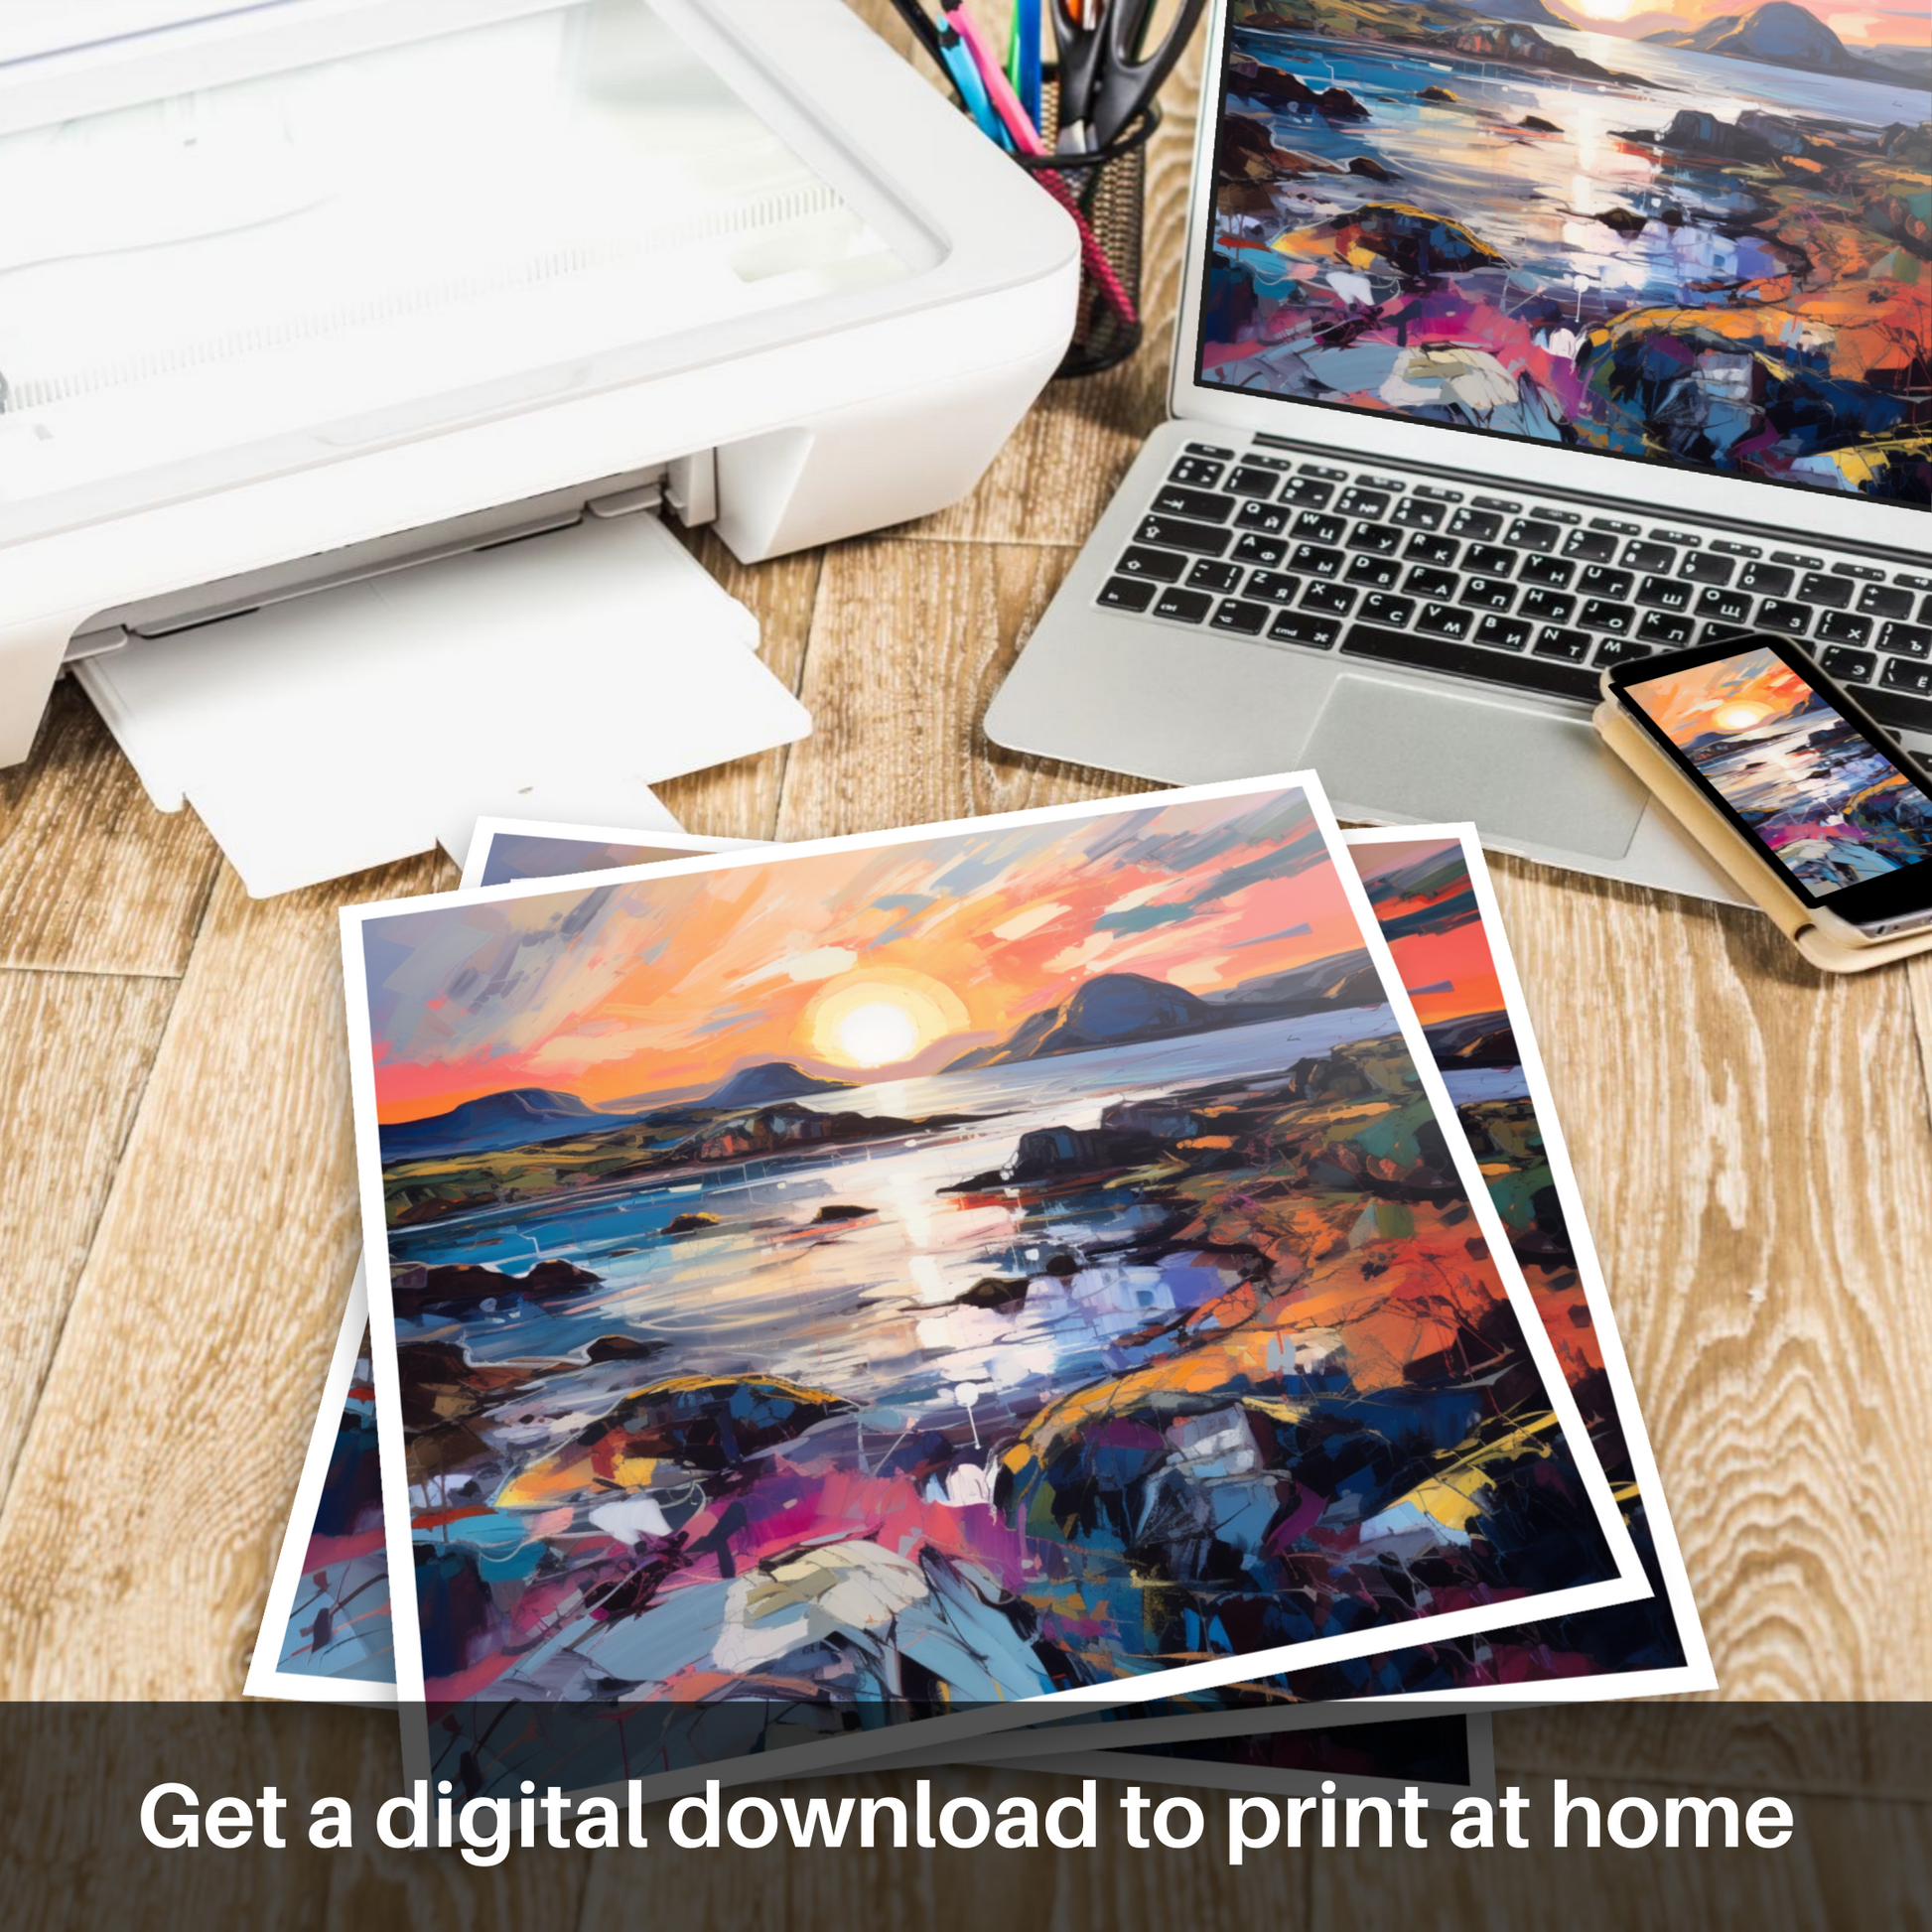 Downloadable and printable picture of Ardtun Bay at sunset